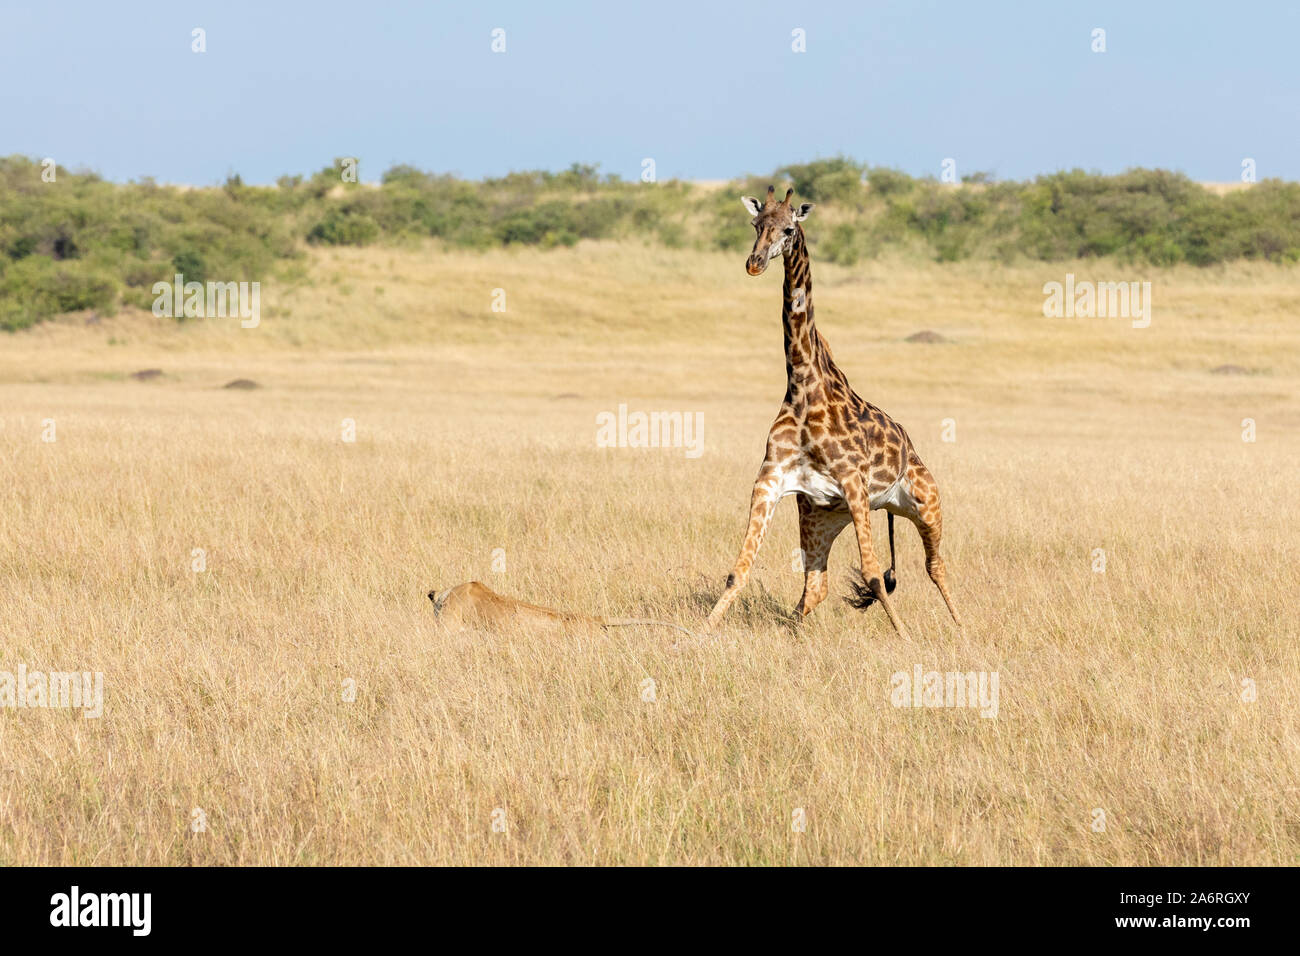 MAASAI MARA, KENYA, AFRICA: The giraffe is distressed as she realises she's killed her newborn calf as the lioness circles her. HEARTBREAKING images s Stock Photo